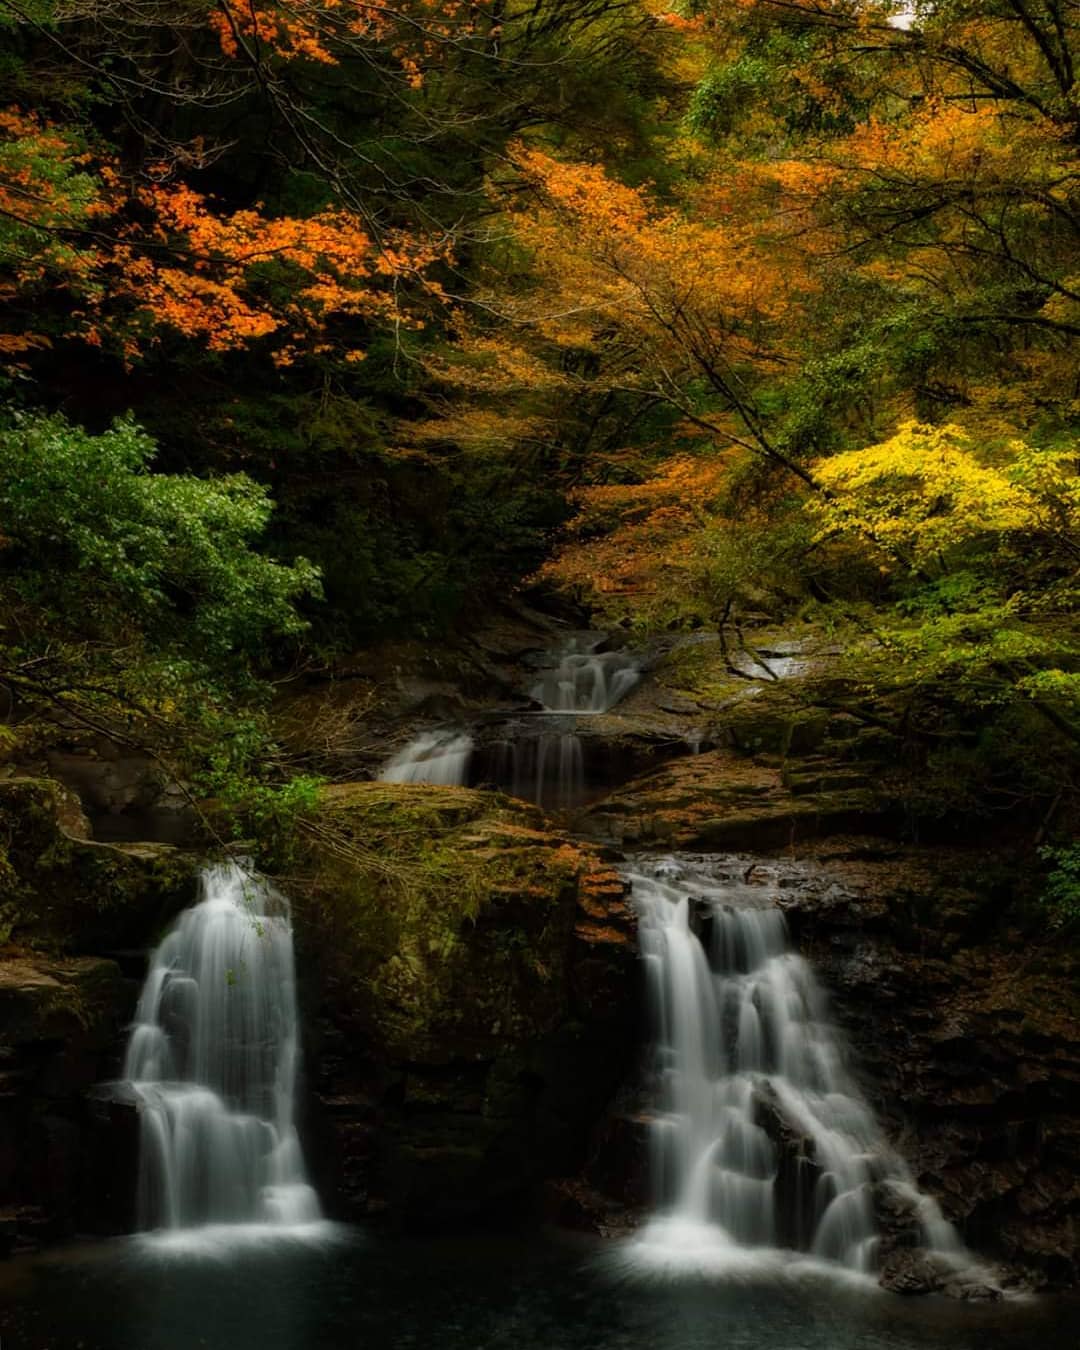 During autumn, the trees surrounding the waterfalls give the scene a vibrant hue.